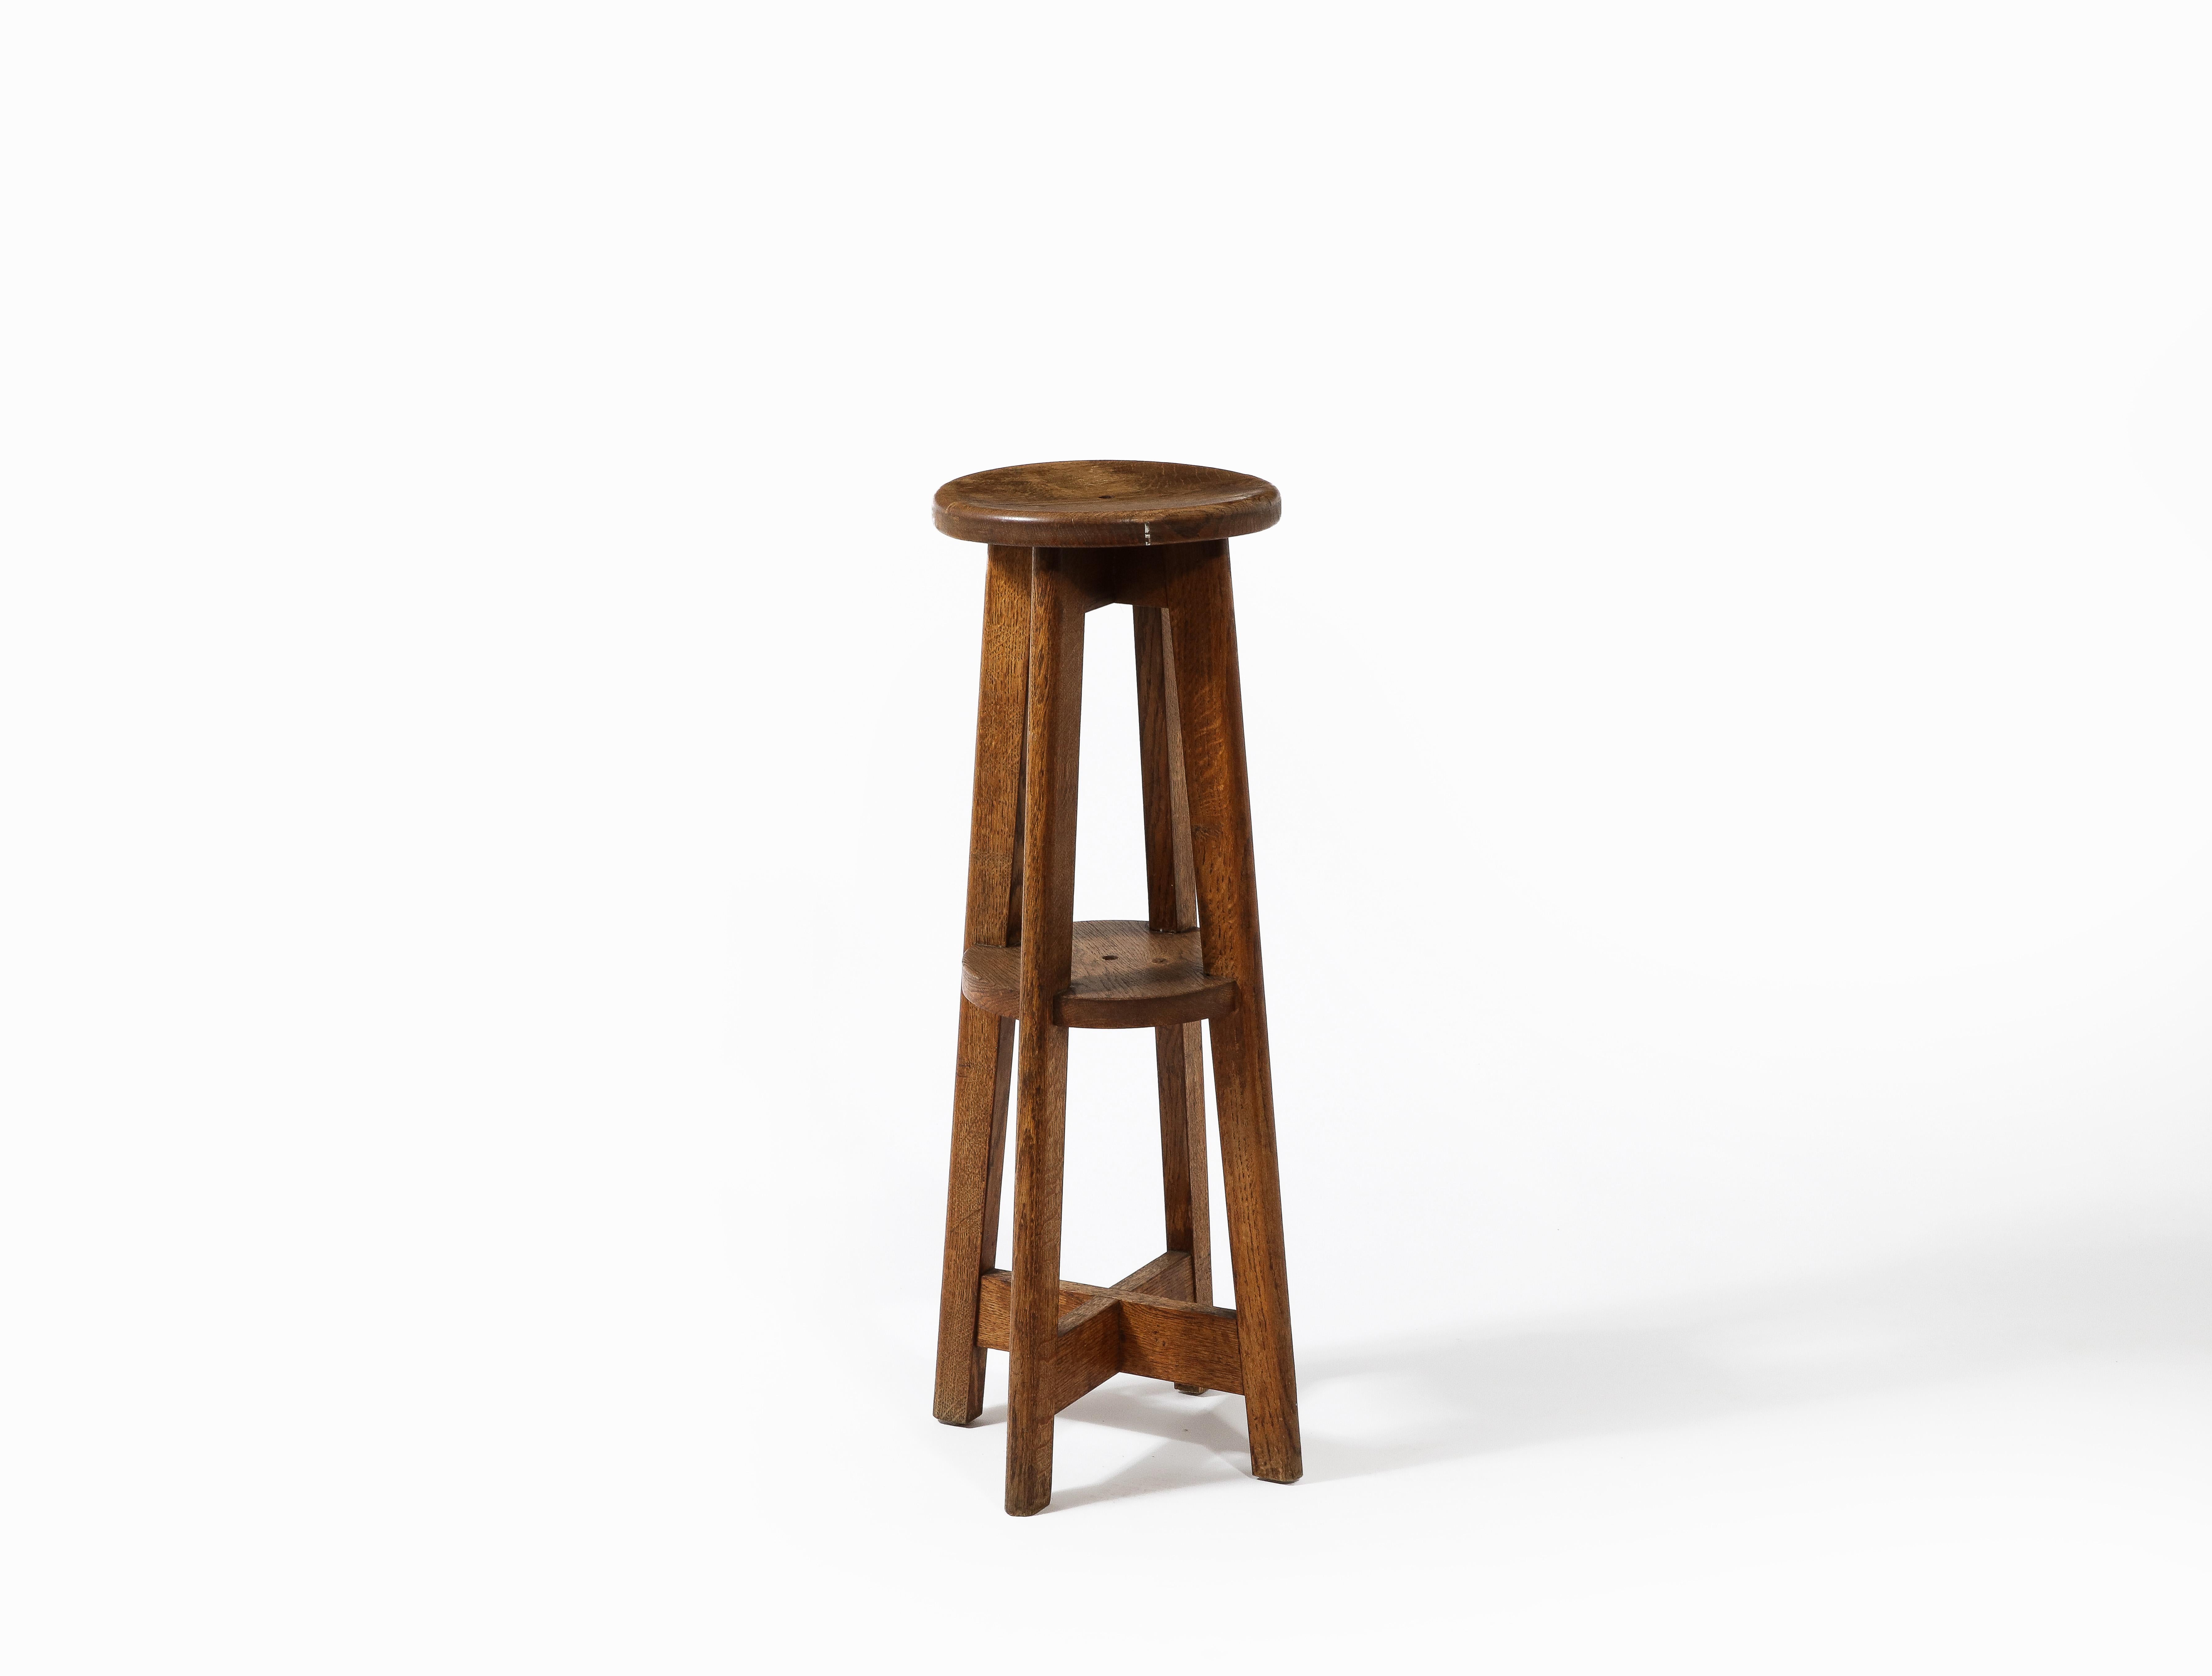 French Tall Rustic Farm Stool or Pedestal in Solid Oak, France 1950's For Sale